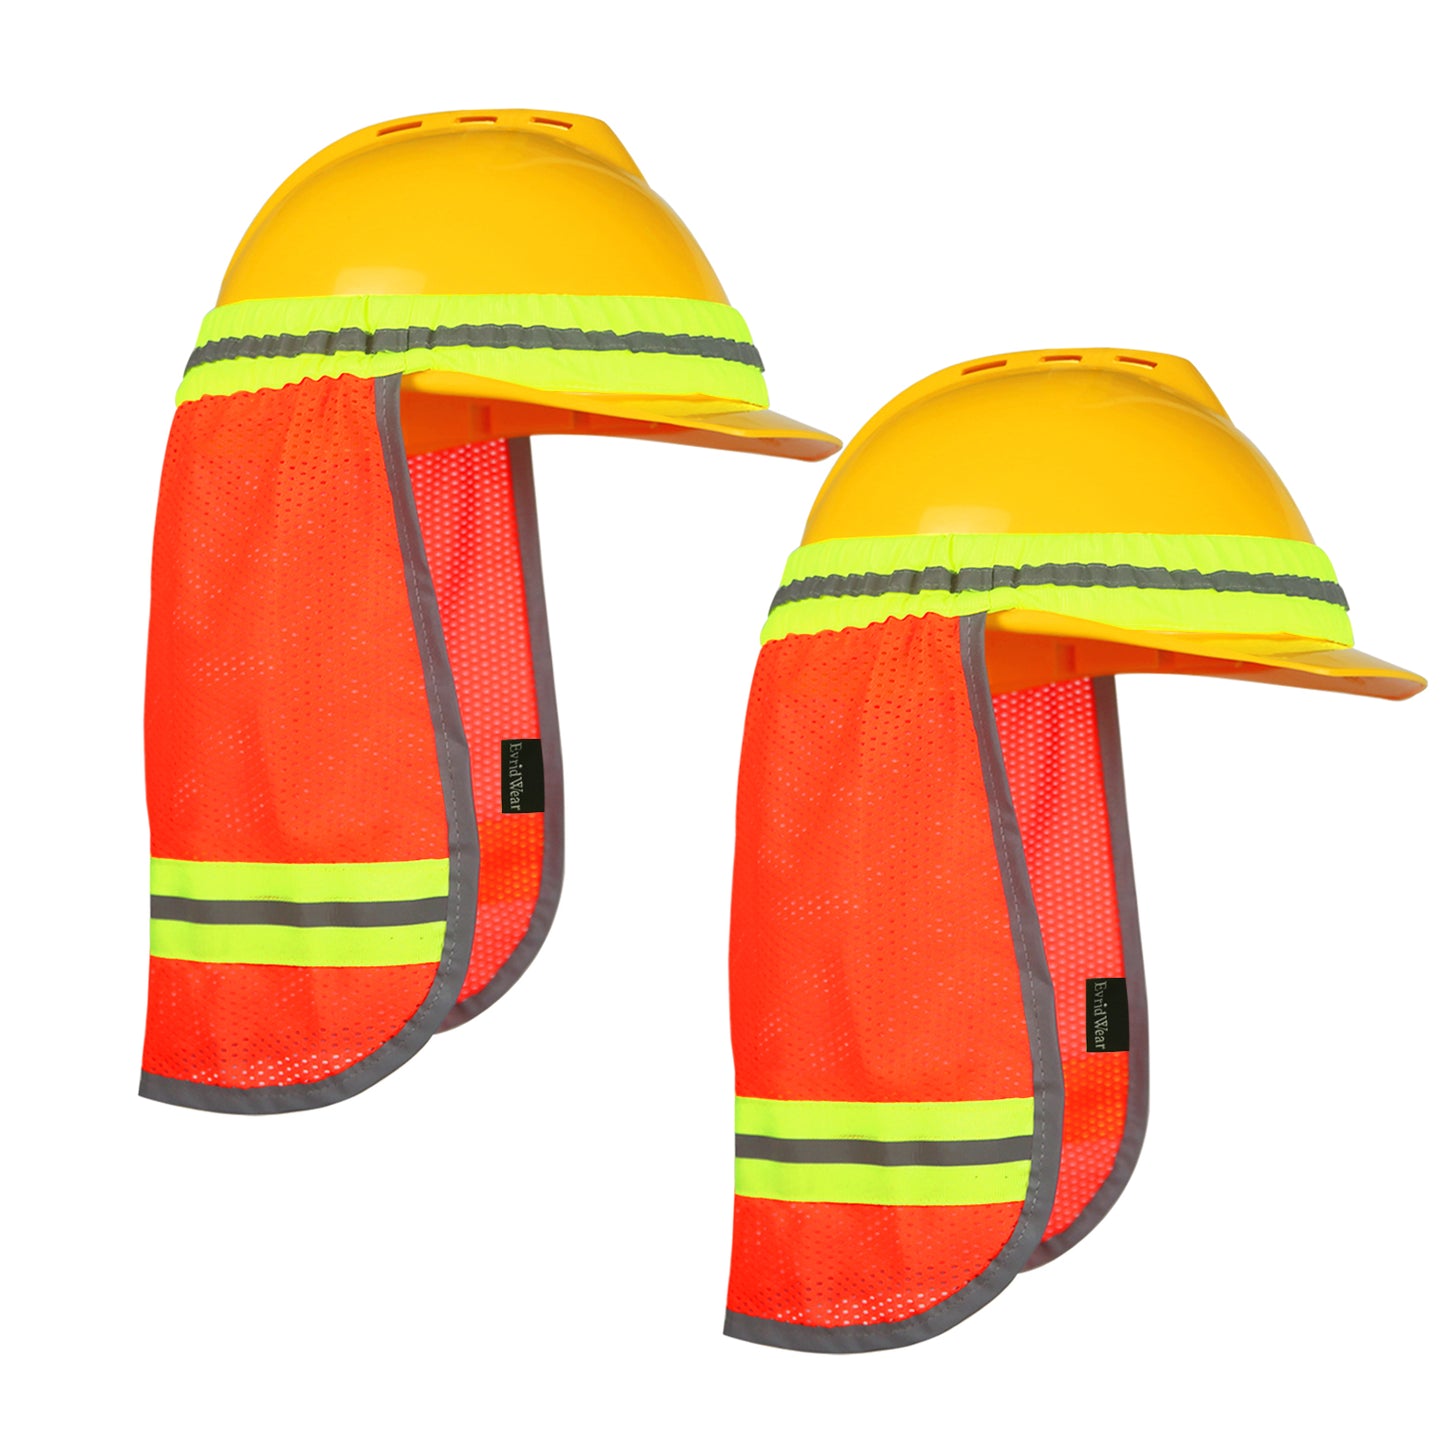 FJDZ Safety Hard Hat Sun Shade Shield for Construction, Outdoor Activities, UV Protection